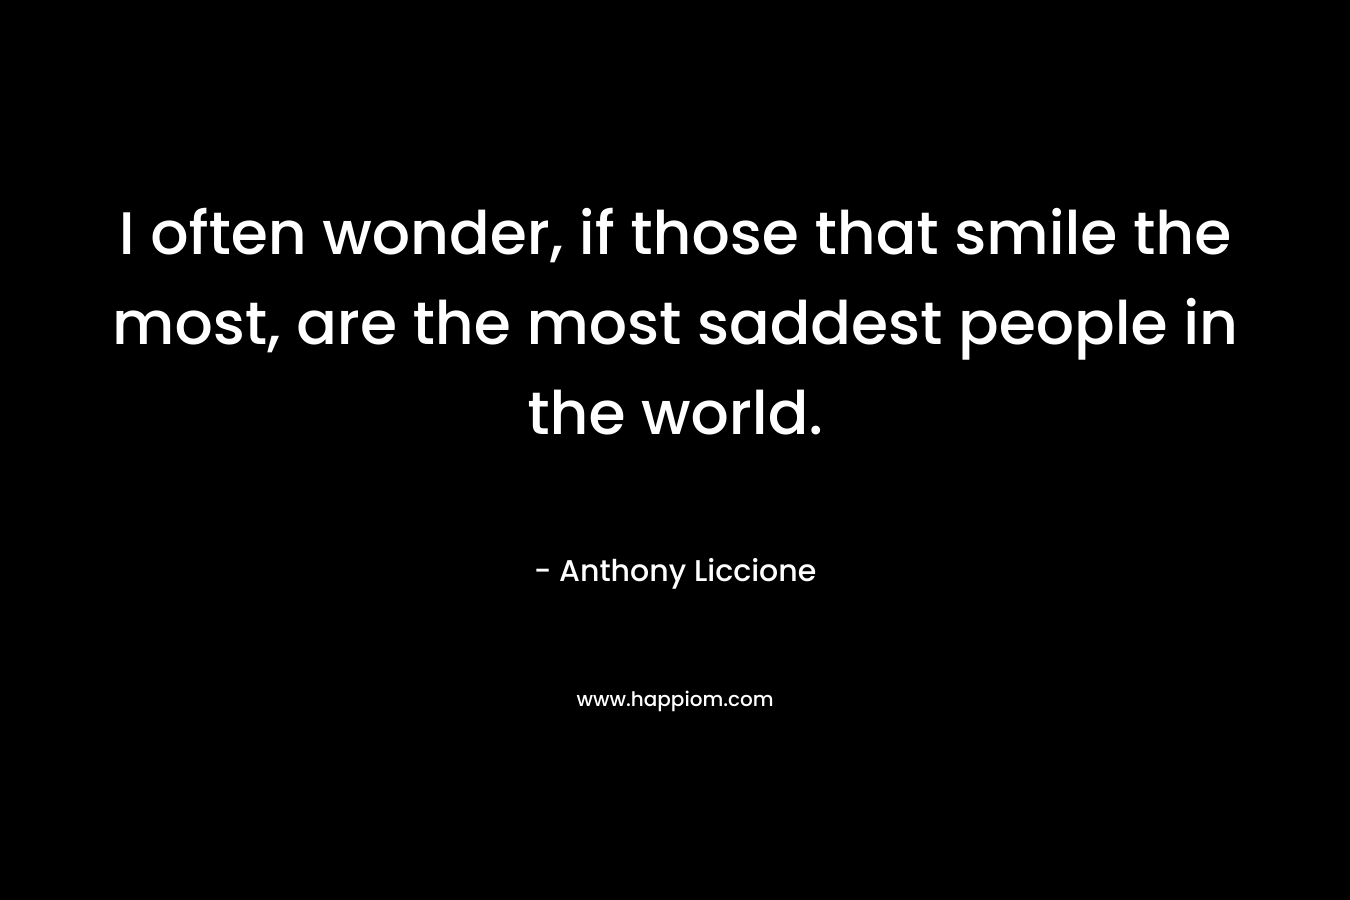 I often wonder, if those that smile the most, are the most saddest people in the world. – Anthony Liccione